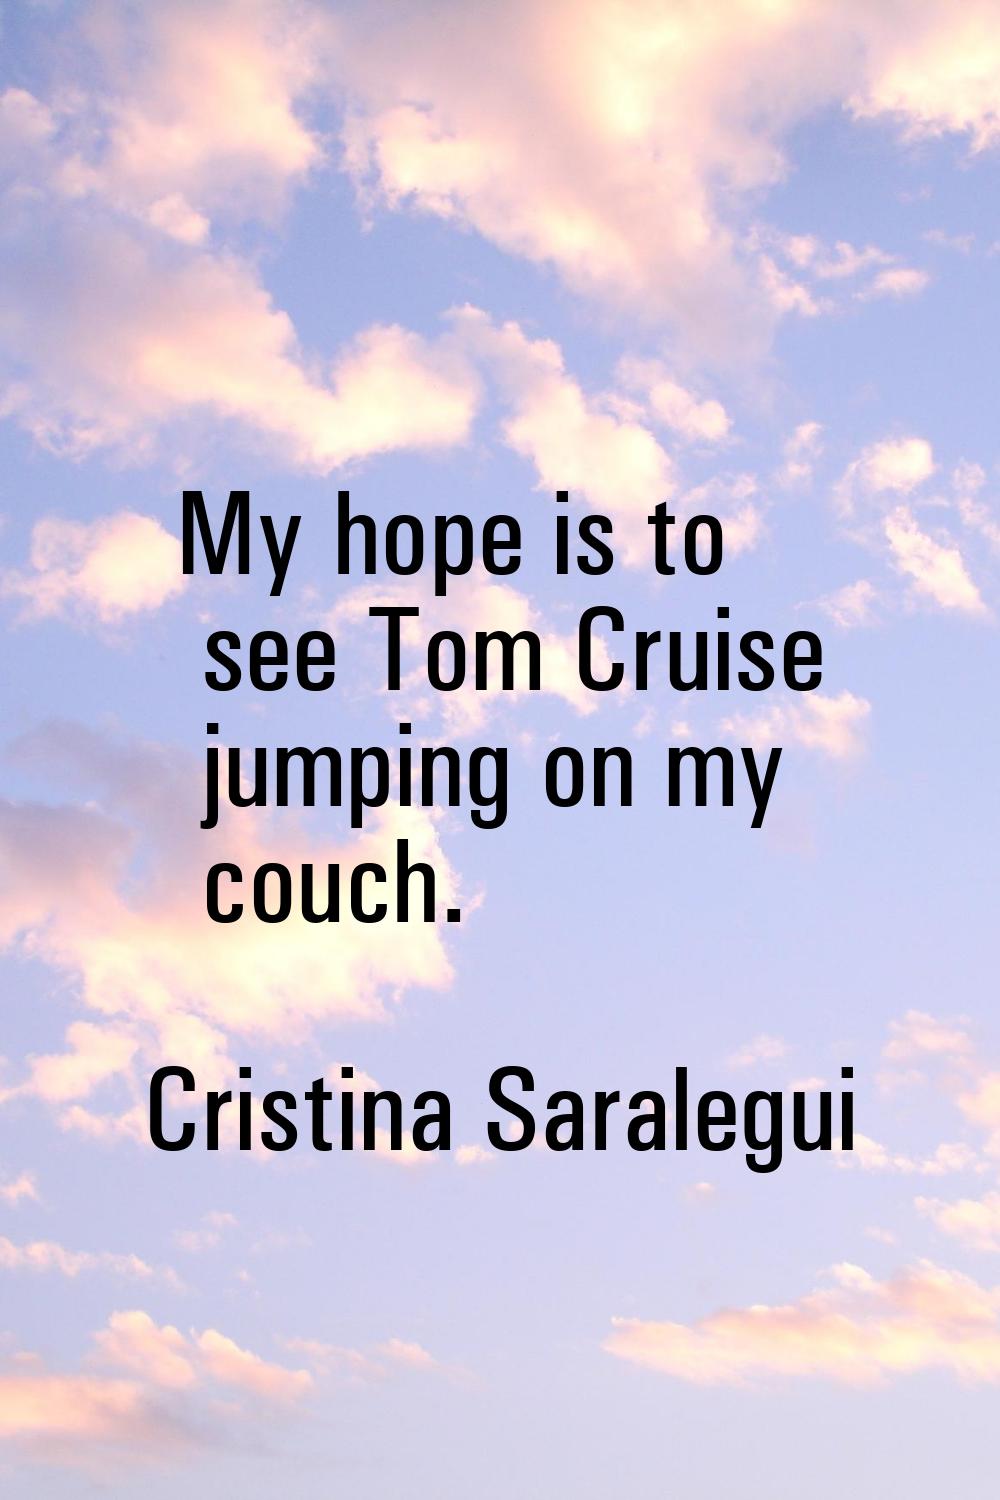 My hope is to see Tom Cruise jumping on my couch.